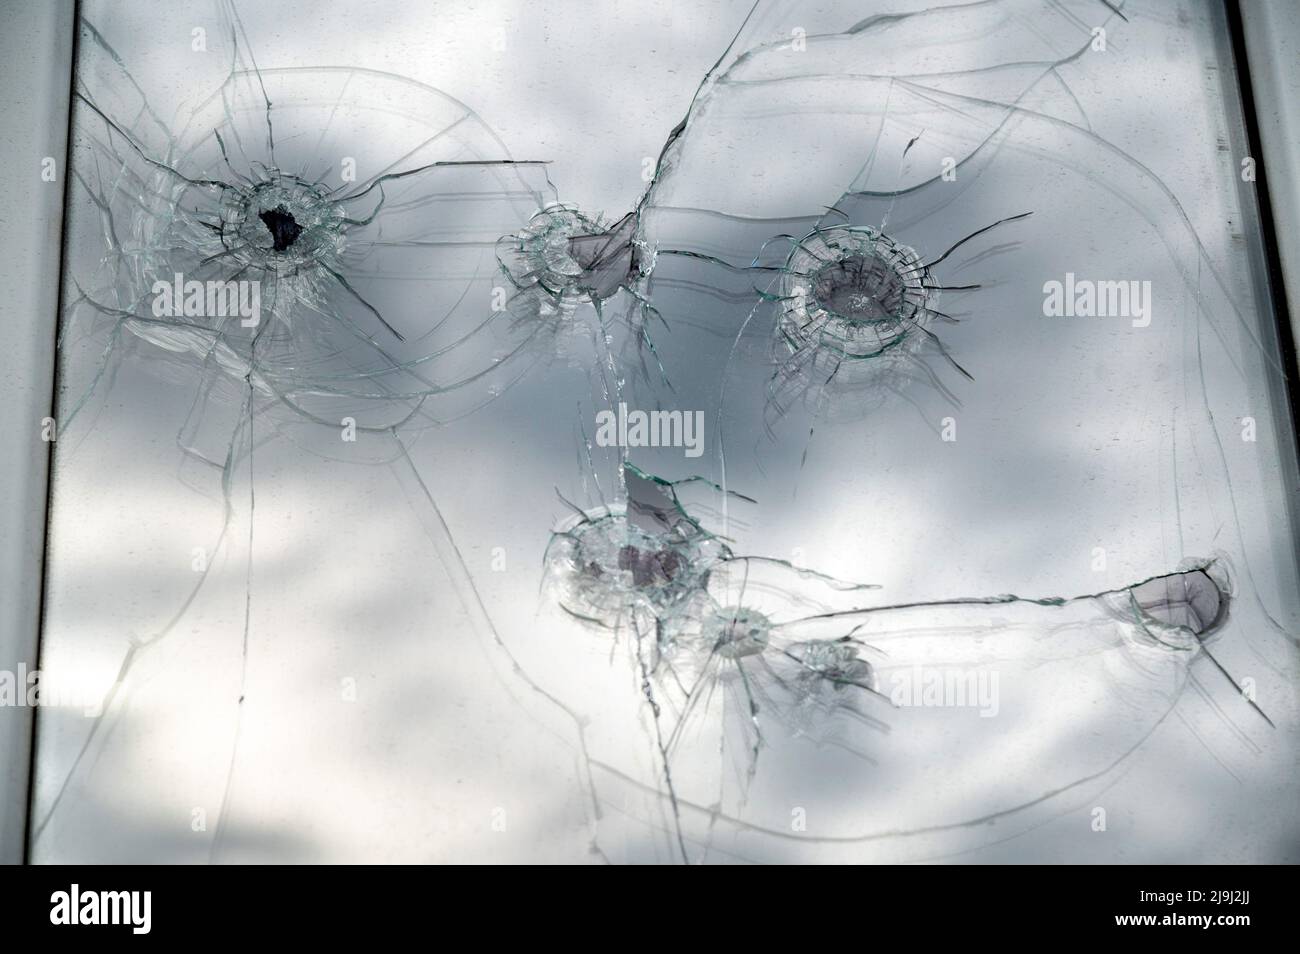 Consequences of mortar shelling by soldiers of the Armed Forces of Ukraine of the border village of Tetkino, Glushkovsky district, Kursk region. Bullet holes in a building window. 20.05.2022 Russia, Kursk region Photo credit: Oleg Kharseev/Kommersant/Sipa USA Stock Photo